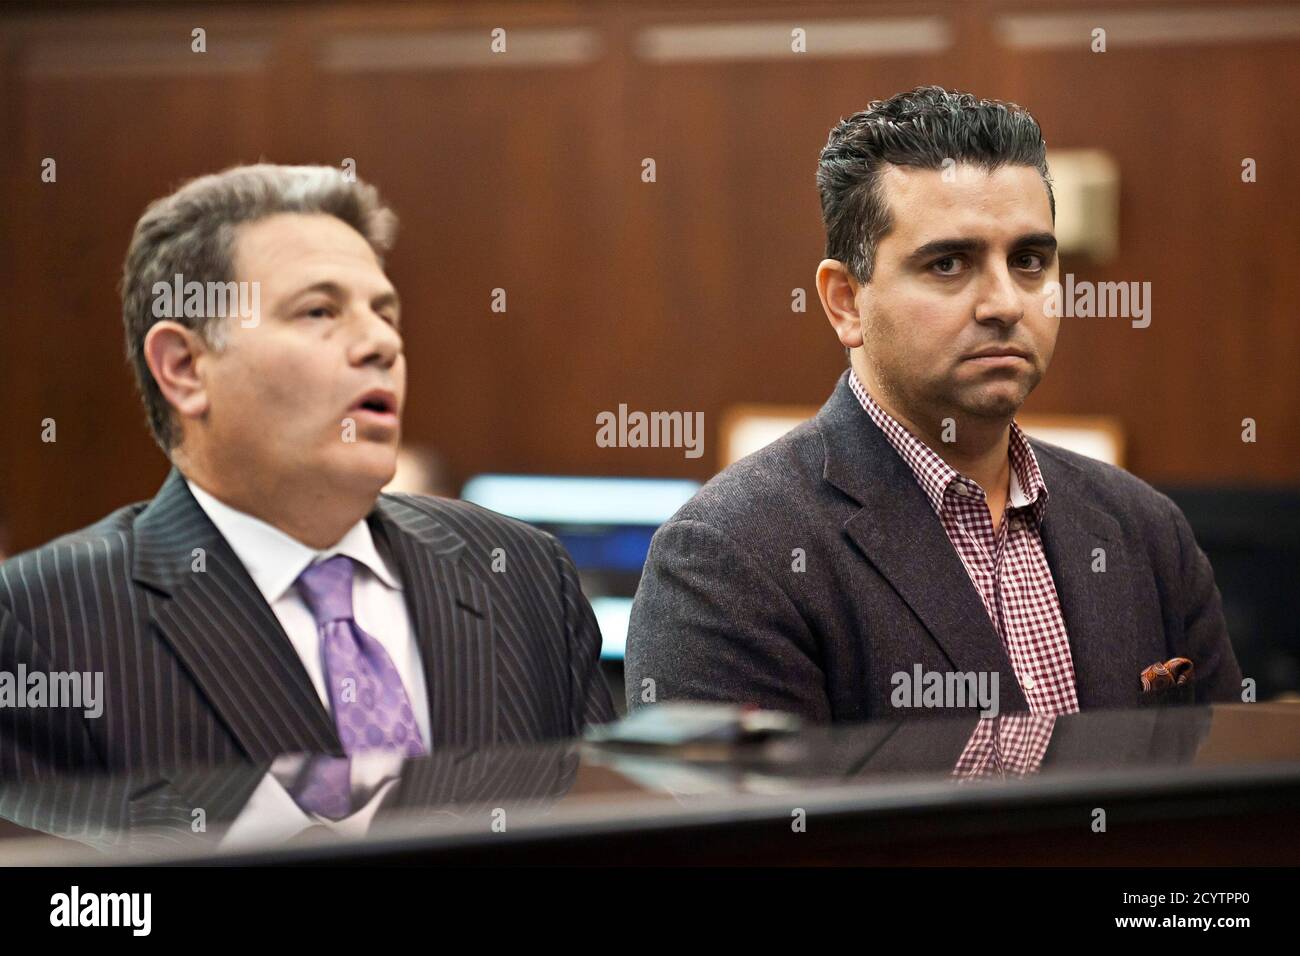 Celebrity chef Bartolo Valastro, Jr. appears in court at the Manhattan Criminal Courthouse in New York November 13, 2014. The of the reality TV show Boss" was arrested on